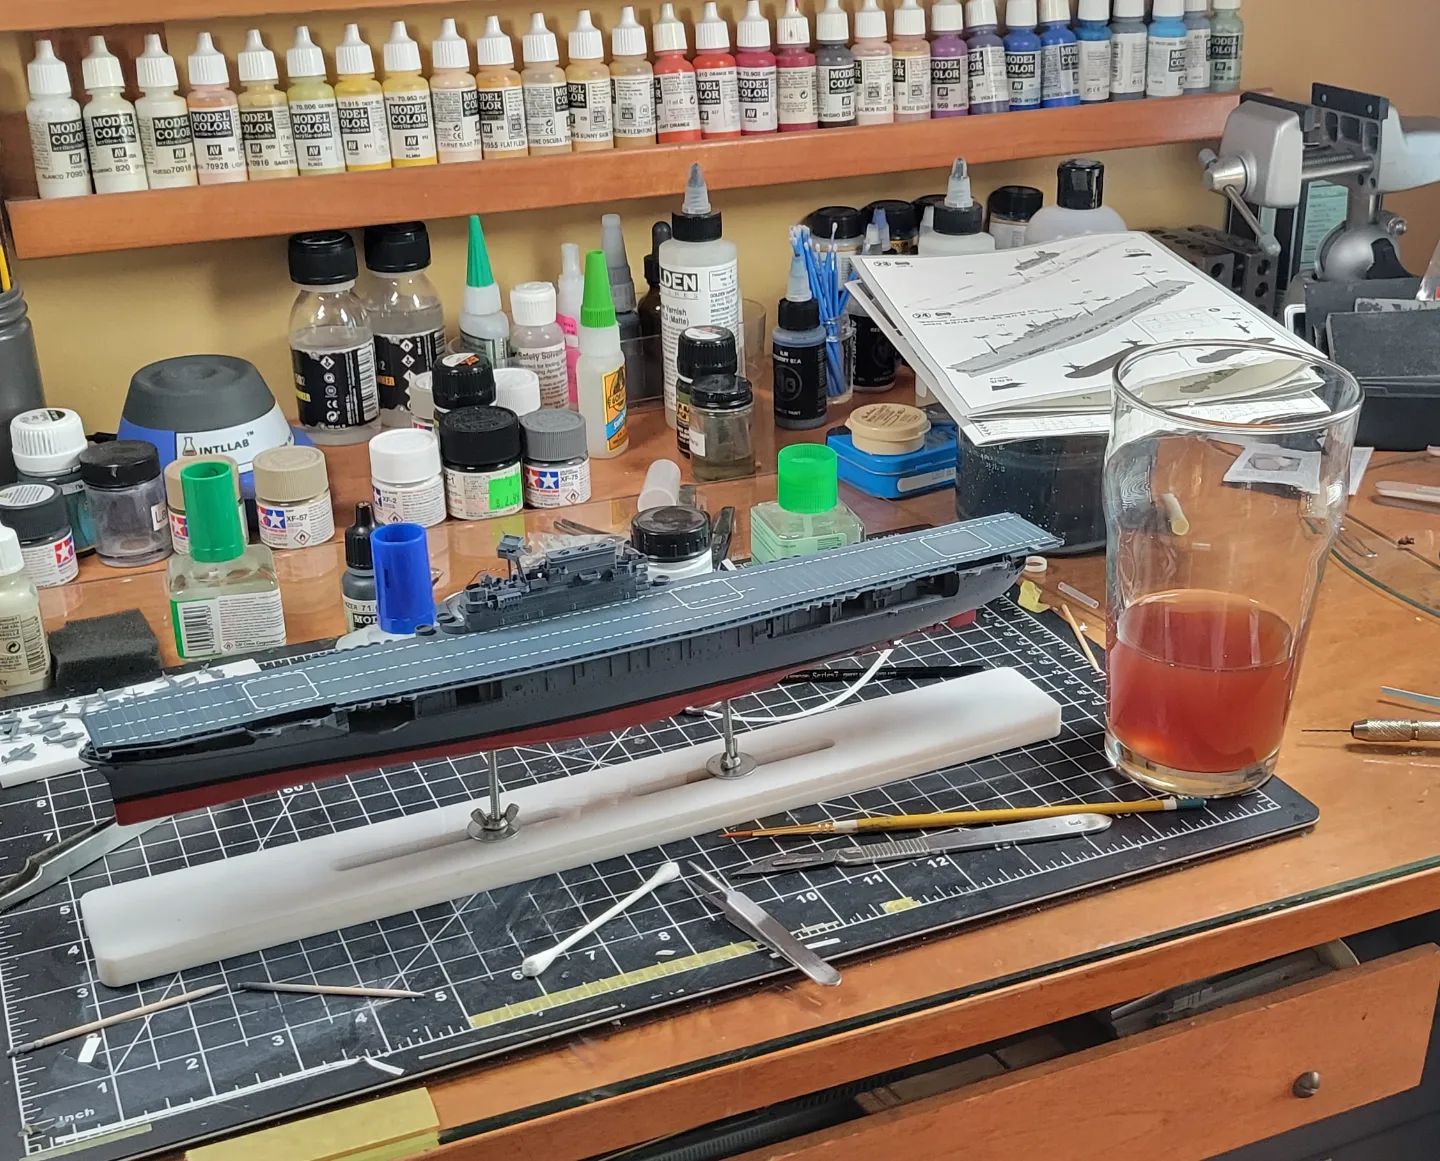 I was going to paint the deck markings on Enterprise,  but decided to give the decals a go. Despite being too bright white, they went down nice. Weathering will dull them a bit. In the glass is what's left of a bottle of Old Mure Tilquin, a Belgian Lambic style, brewed with blackberries.